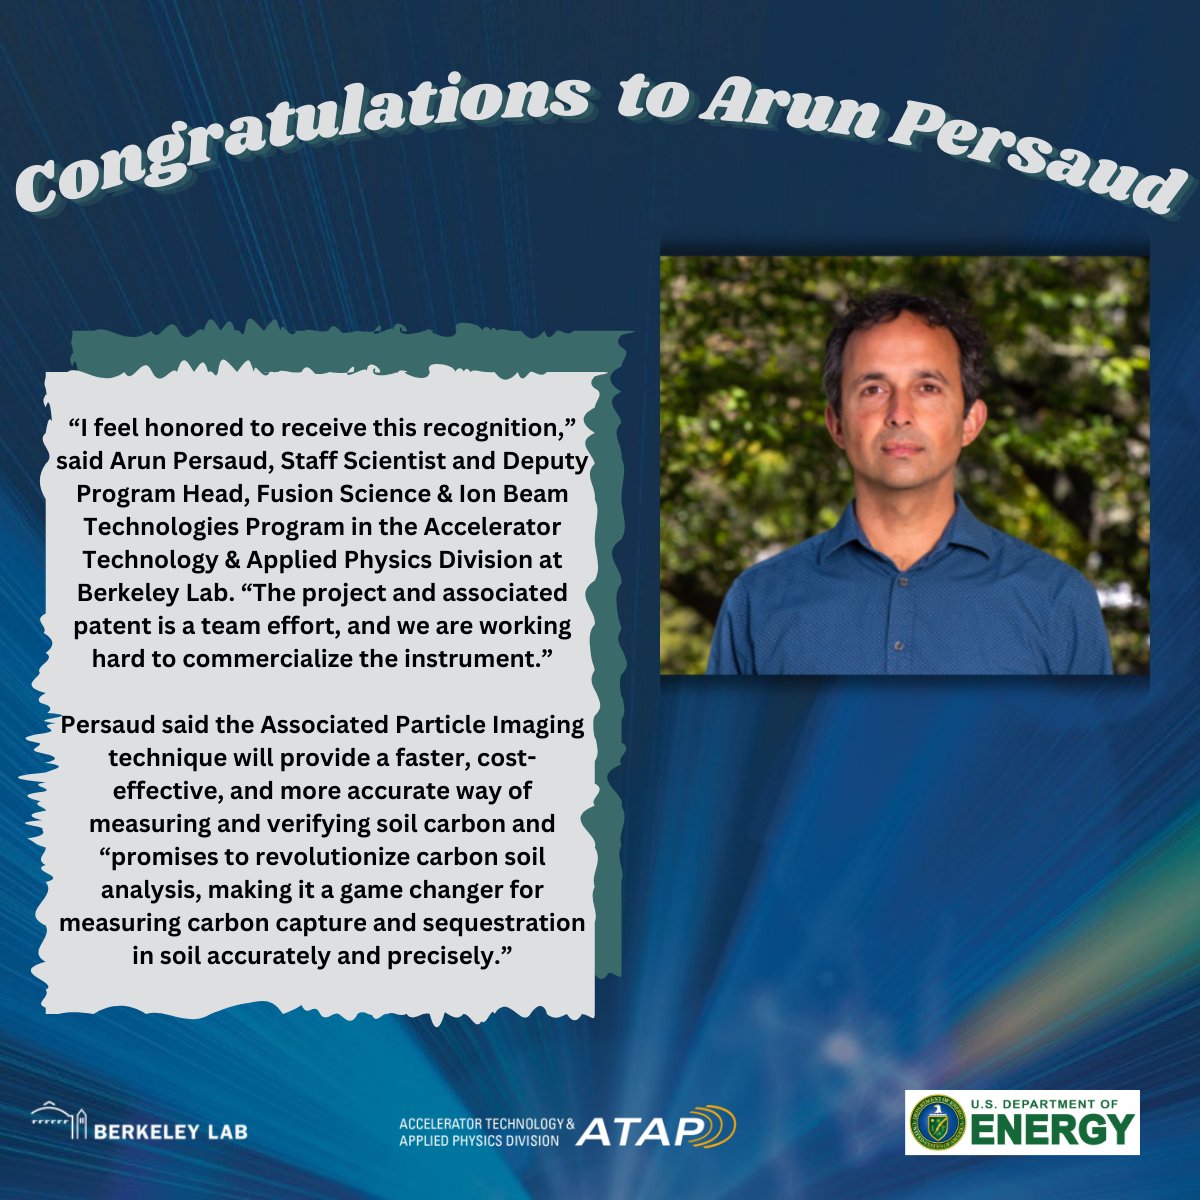 Congratulations to our Staff Scientist, Arun Persaud, for being named one of the 'Inventors/Developers of the Year' for a method to measure soil carbon that supports efforts toward a low-carbon economy. @BerkeleyLab @ENERGY @OTTatDOE @FECMgov atap.lbl.gov/persaud-receiv…